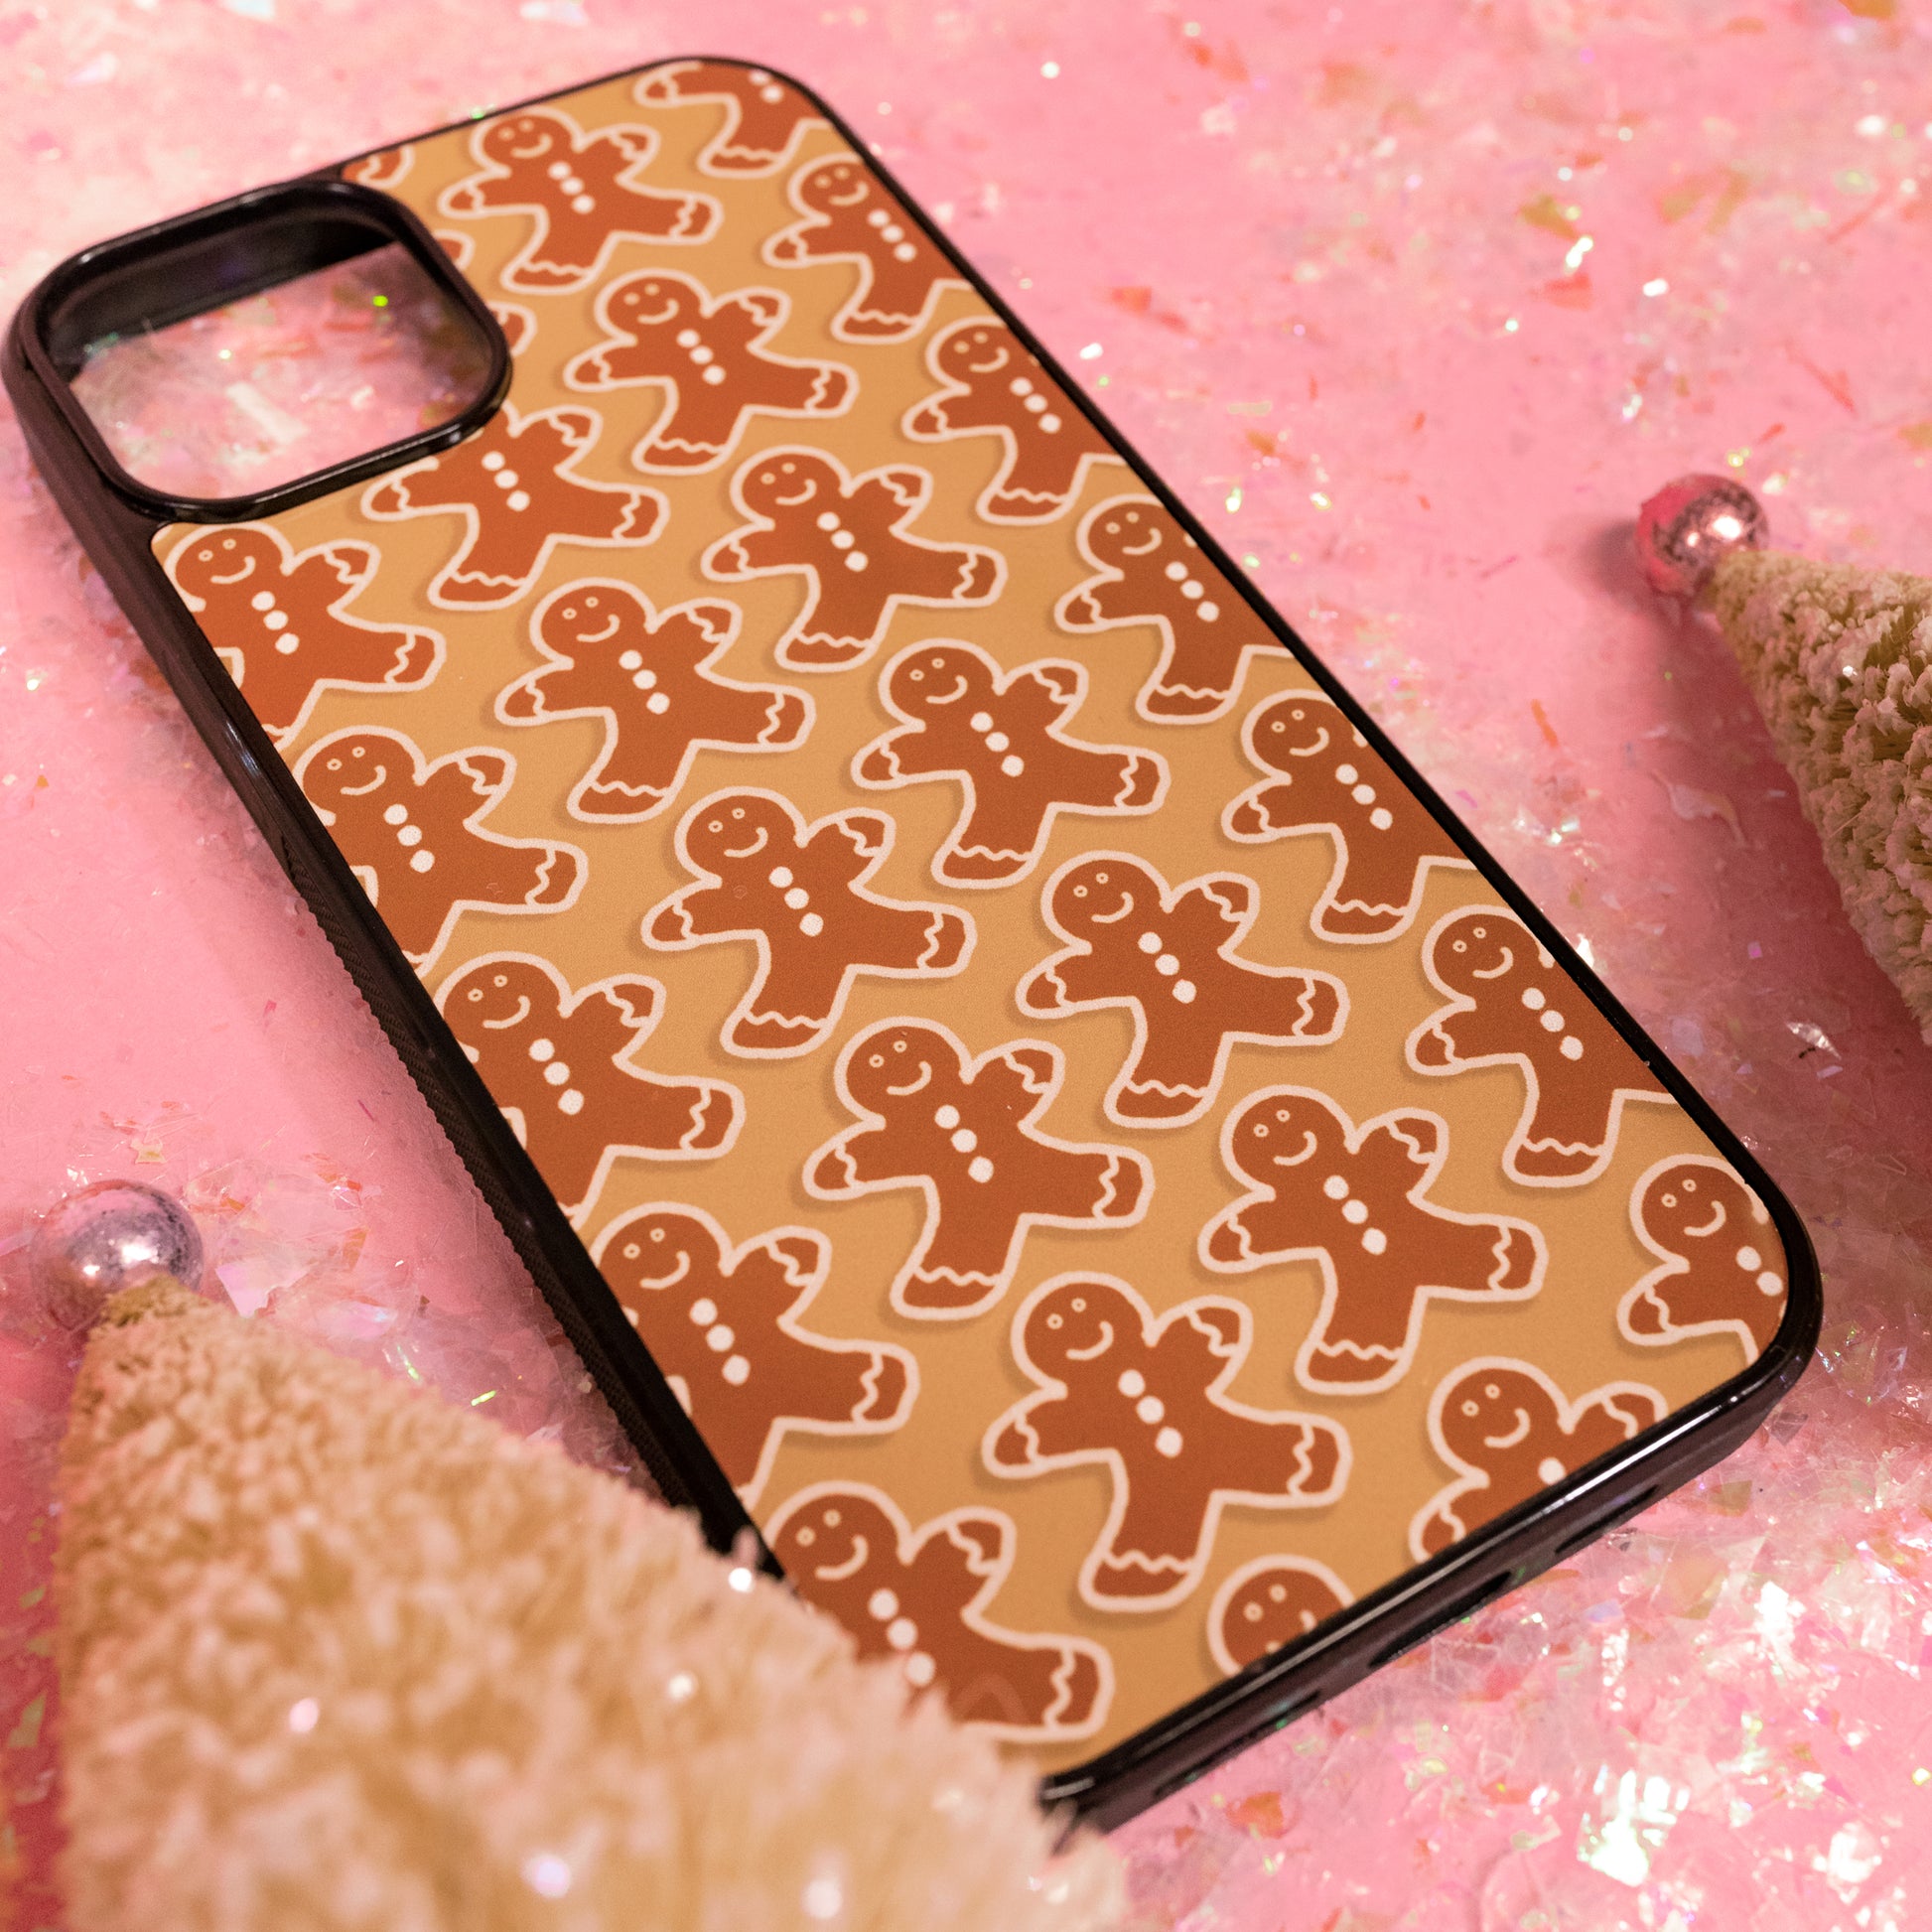 Smiley Gingerbread Man Phone Case - Gasp